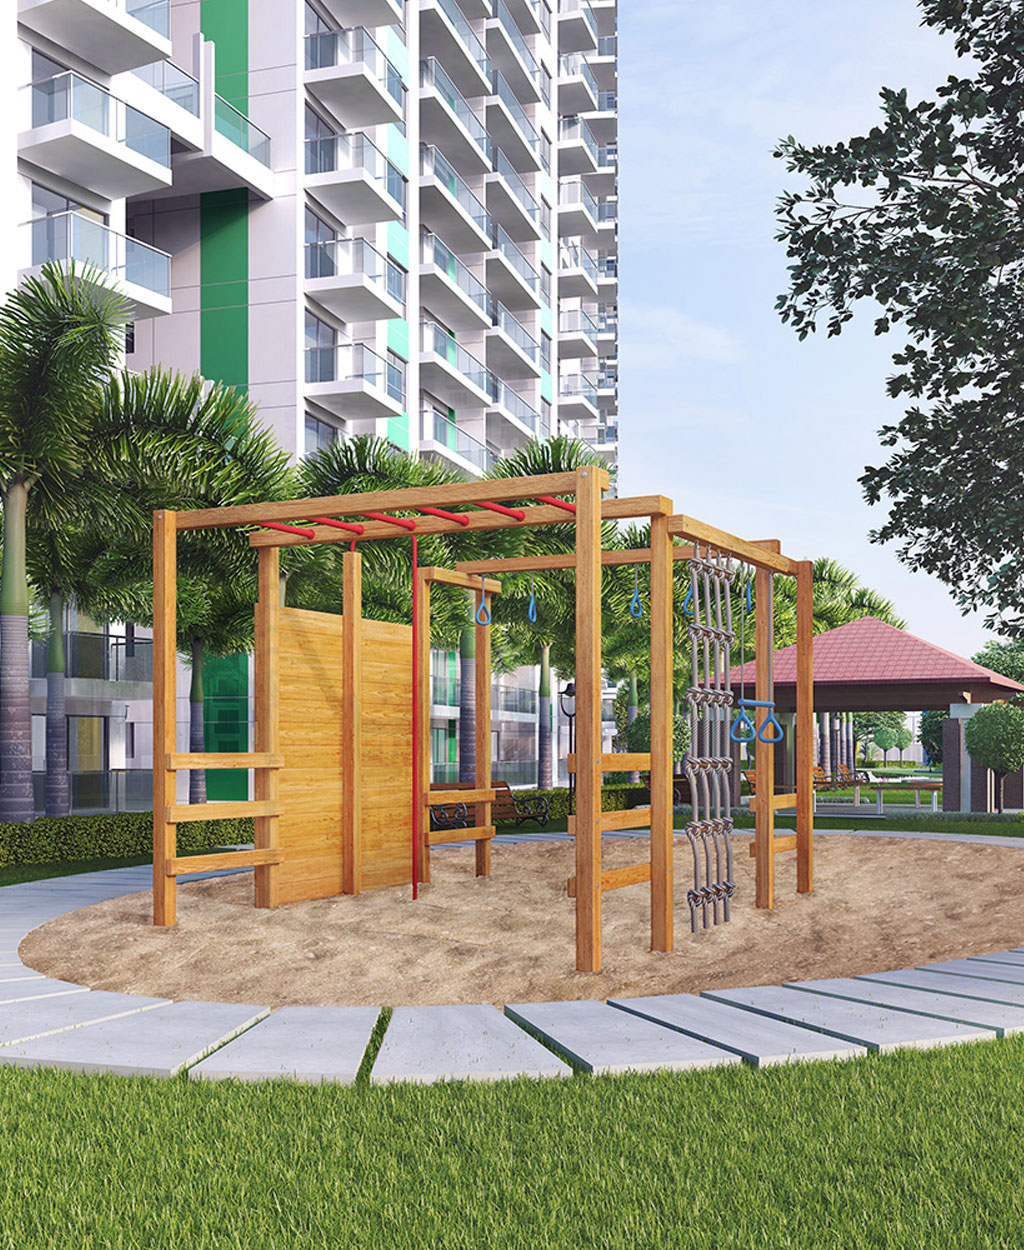 3bhk flats in mohali price